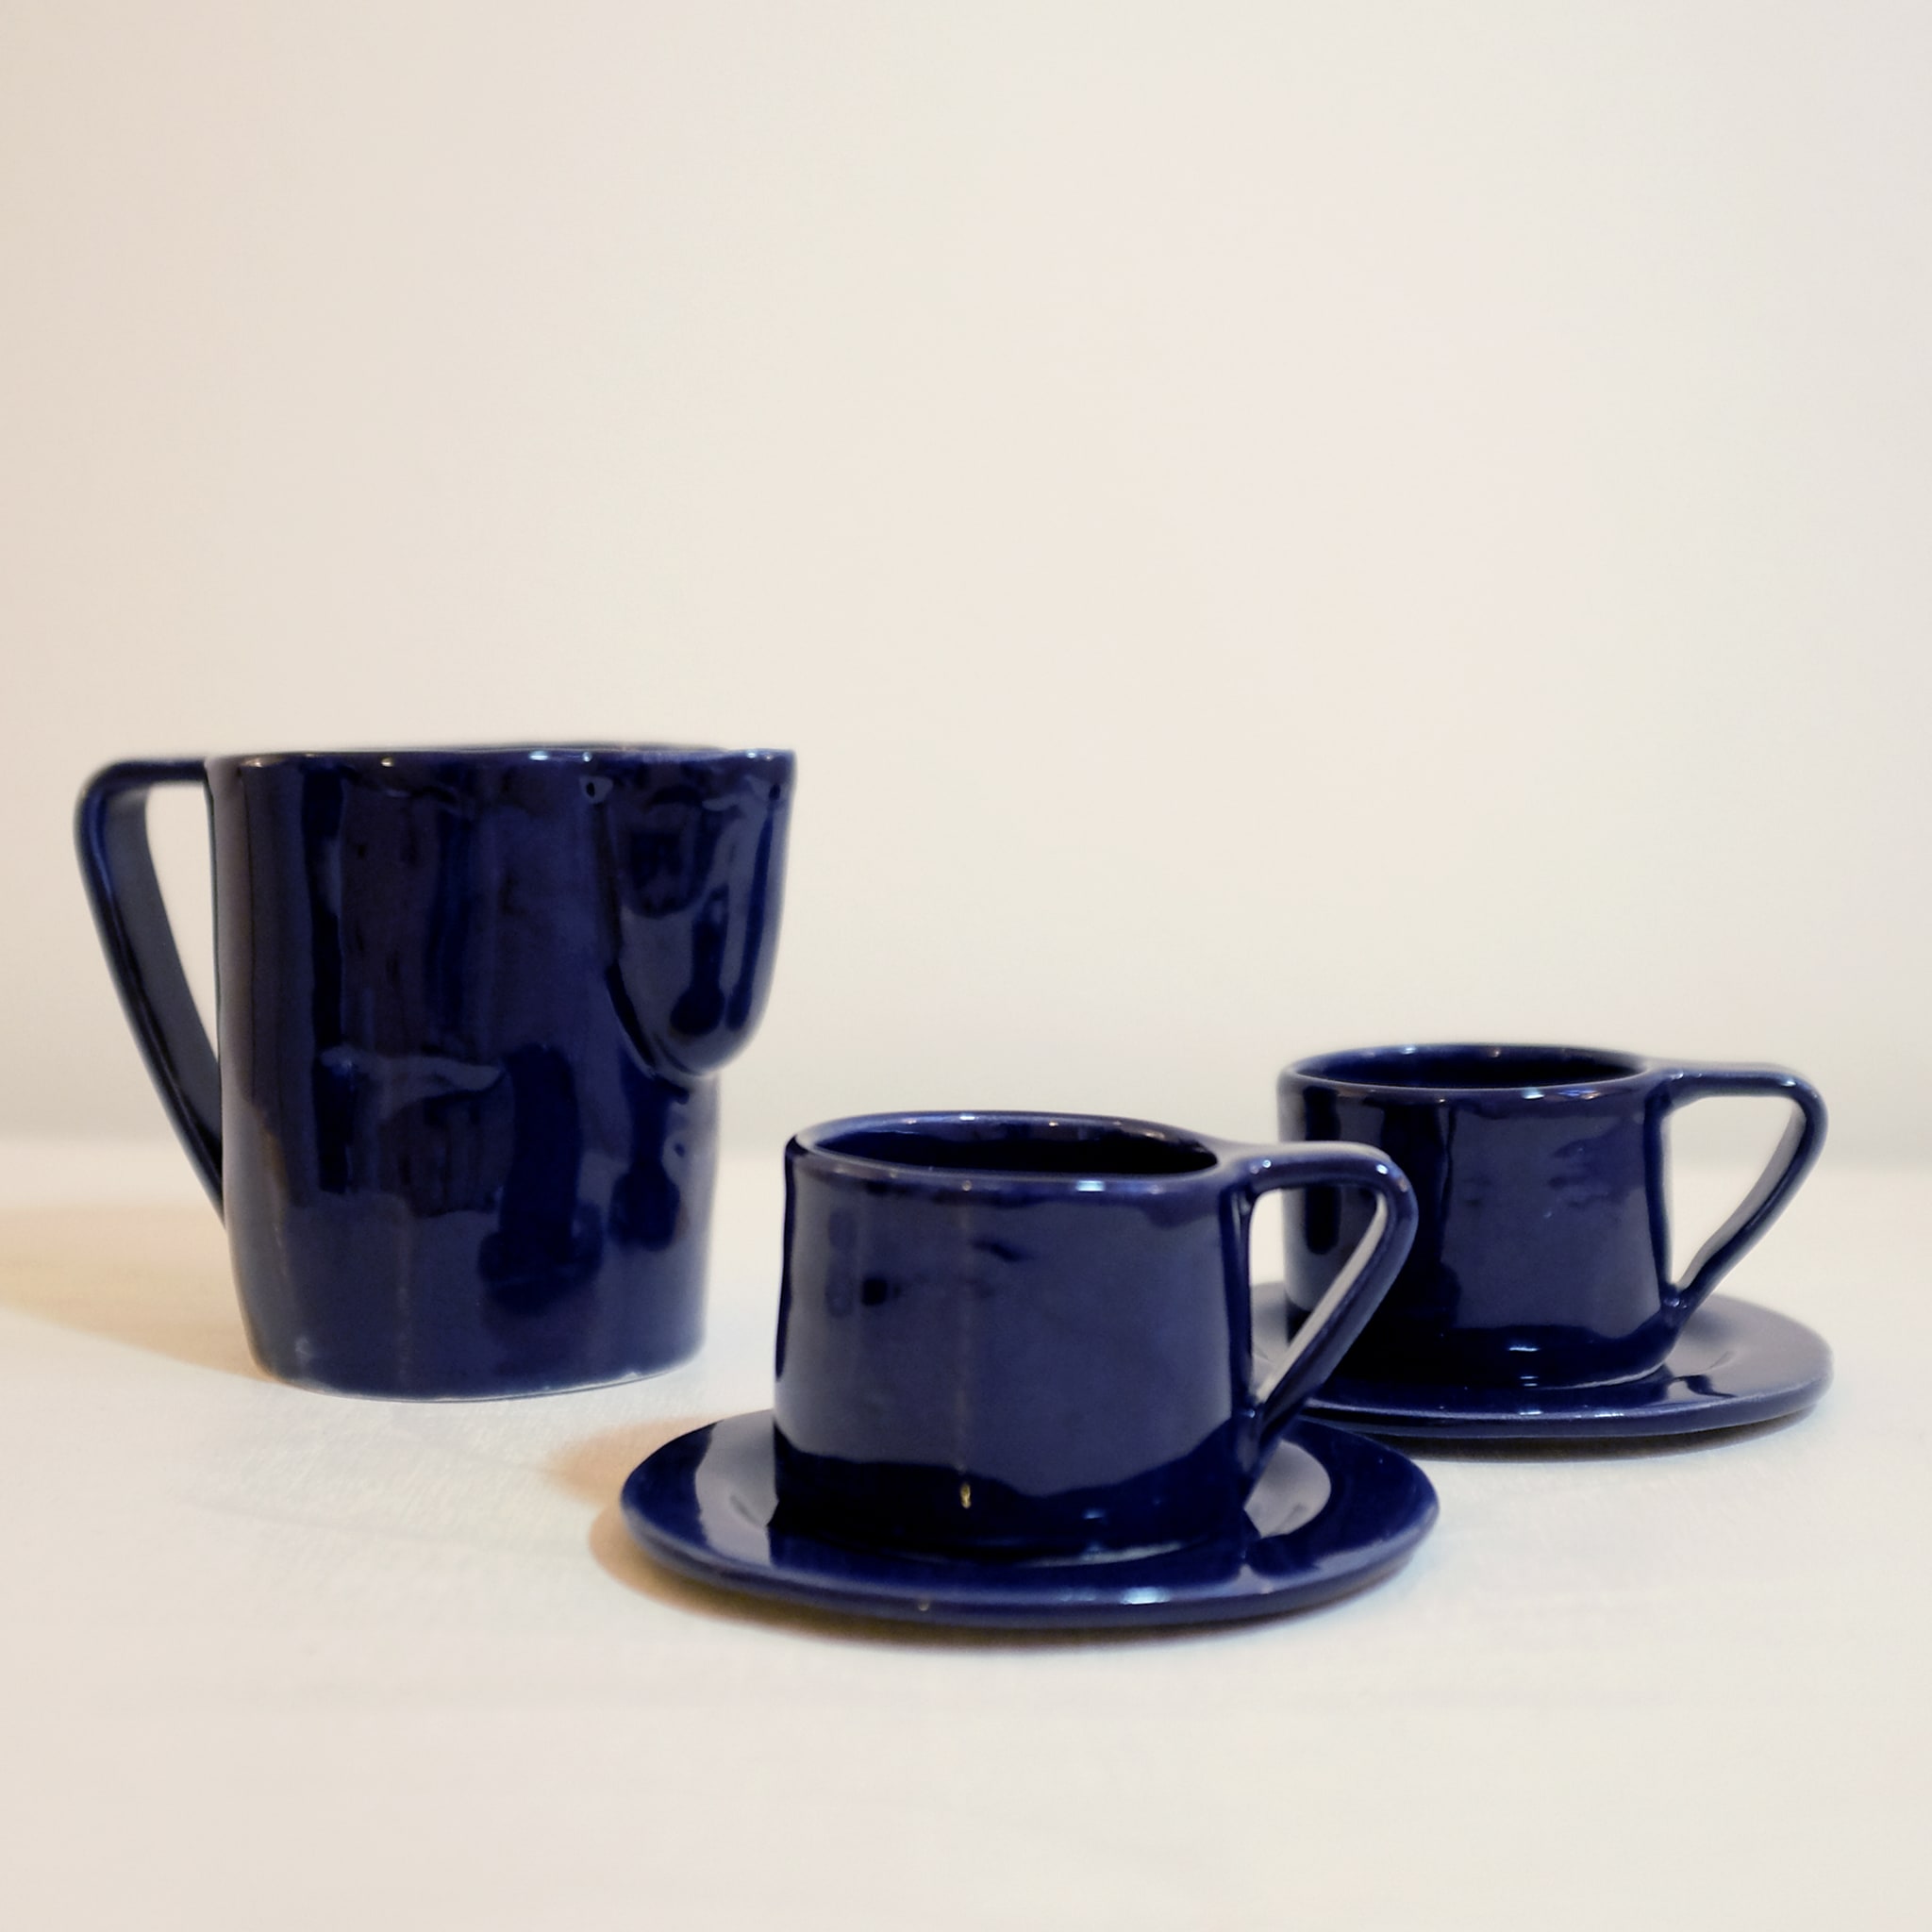 Milano Notte Set of 4 Espresso cups and saucers - Alternative view 1